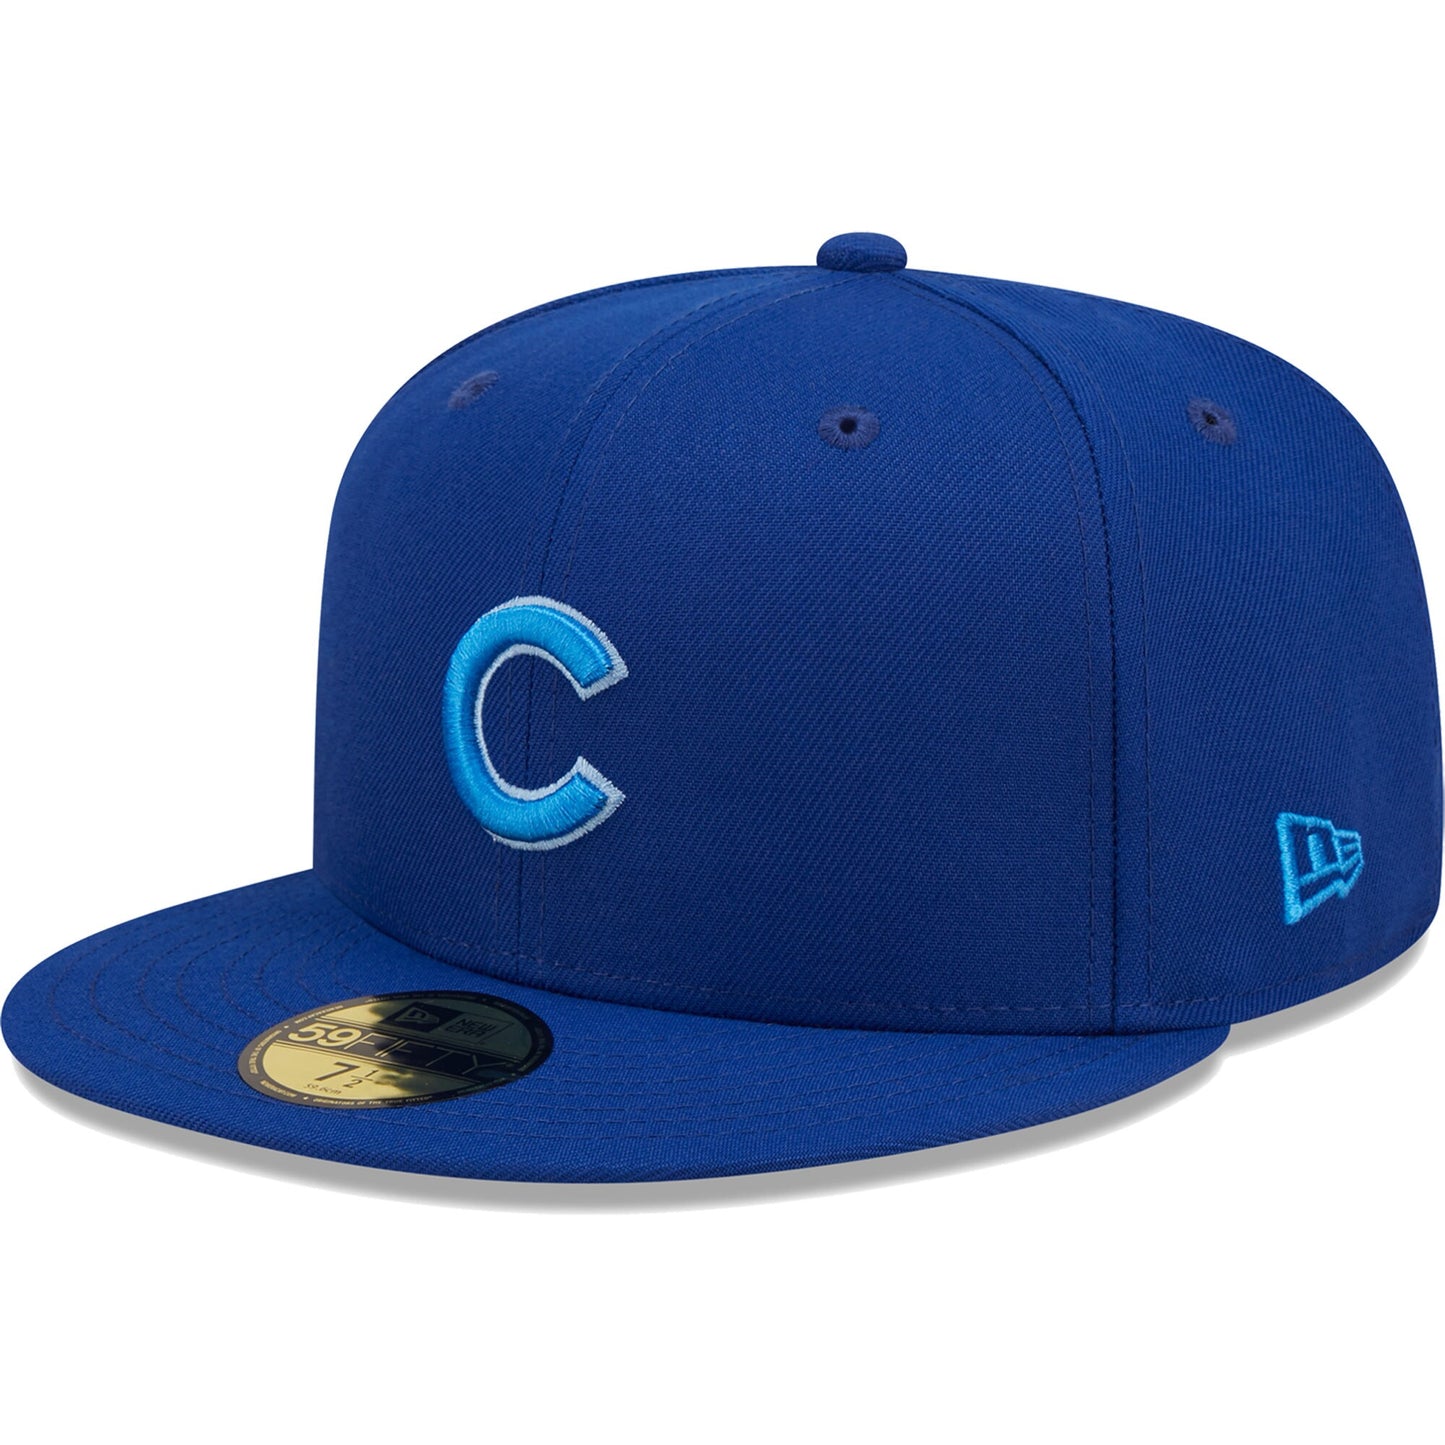 Chicago Cubs New Era Monochrome Camo 59FIFTY Fitted Hat - Royal